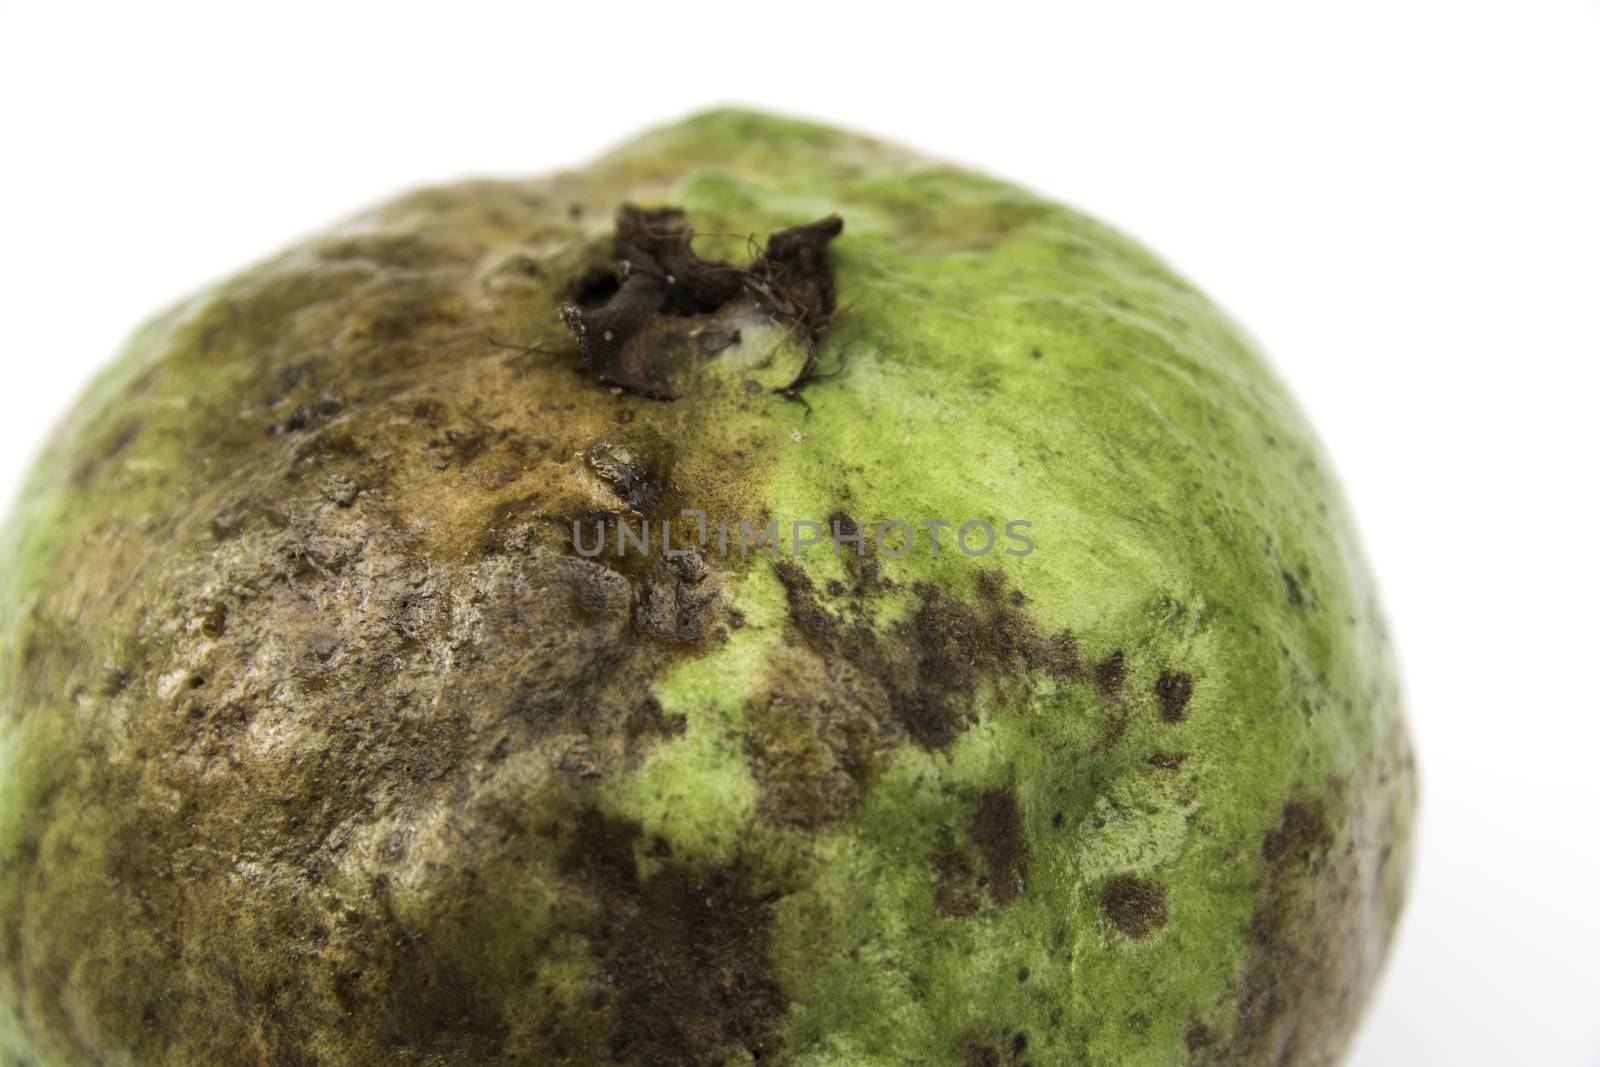 The rotten guava isolated on a white background.